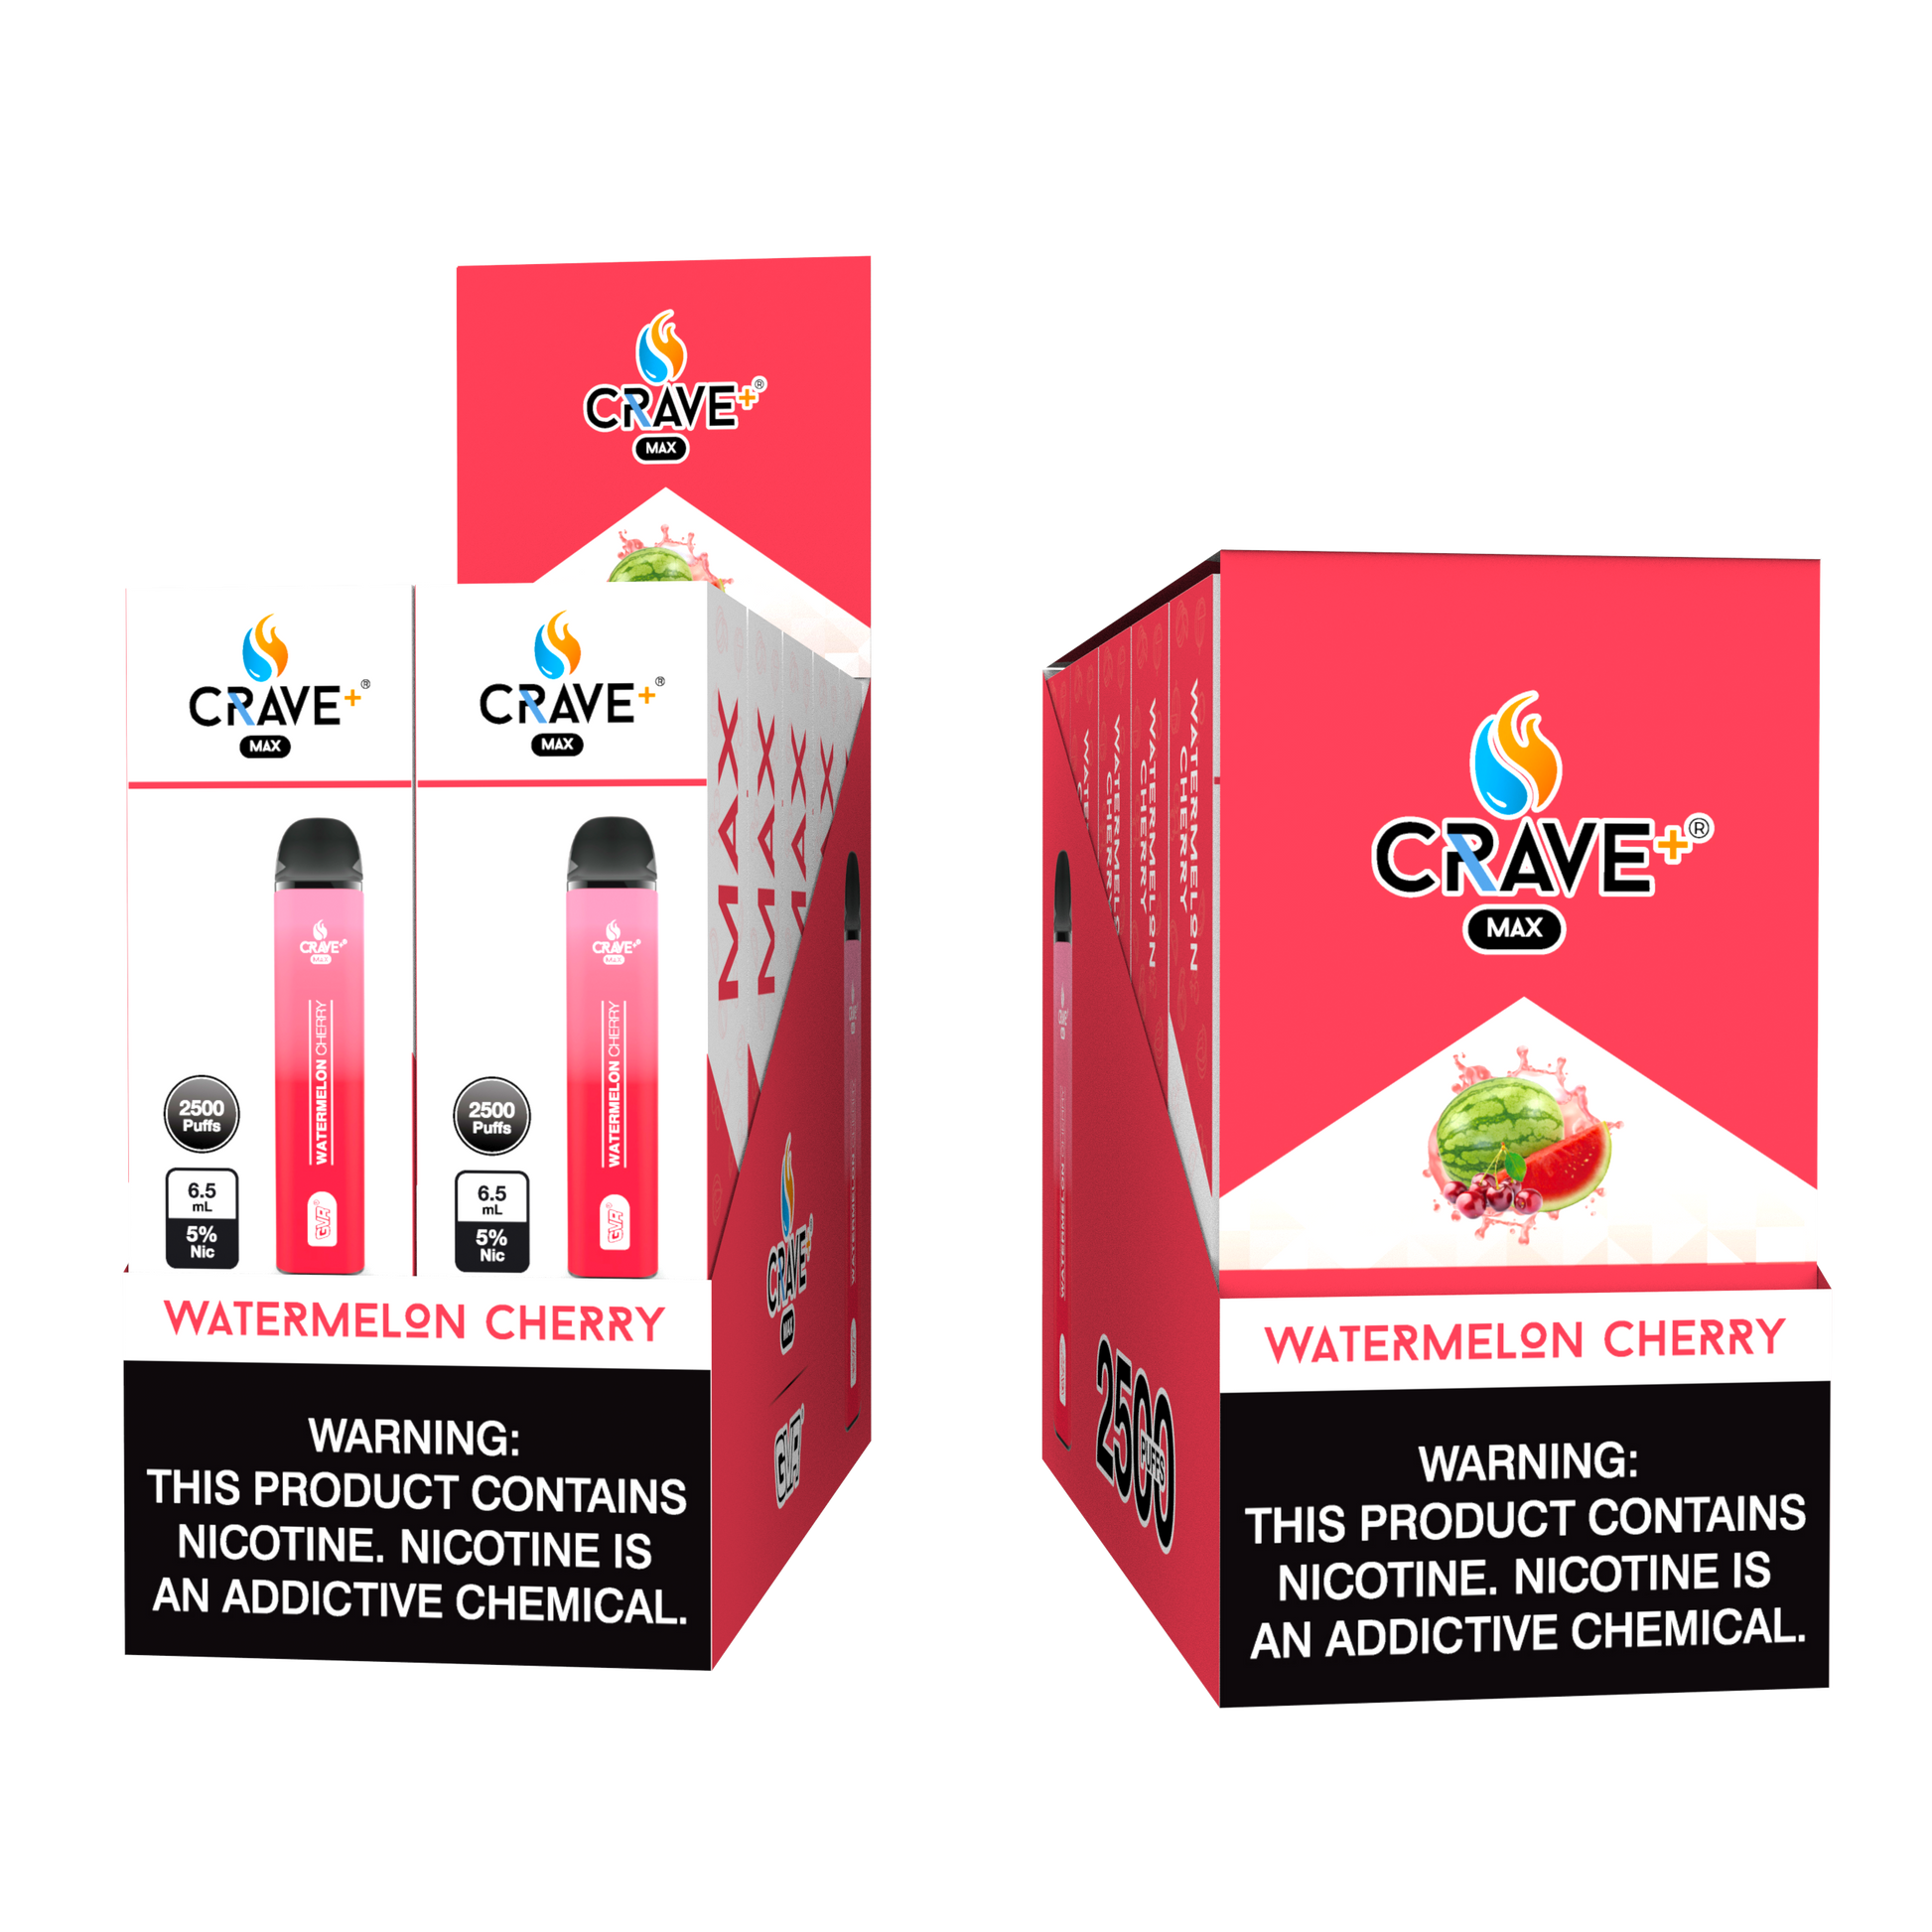 crave max, crave vape, buy crave max, crave max for sale, crave max flavors, crave flavors vape, buy crave vape online, crave max gvr, crave 2500 puffs, crave max 2500 puffs, crave watermelon cherry, watermelon cherry vape, crave max watermelon cherry, crave max cherry watermelon, watermelon cherry vape flavor, crave max disposable 2500 puffs, crave max bulk, crave disposable bulk, crave max vape, vape szn, vapeszn, where to buy crave max